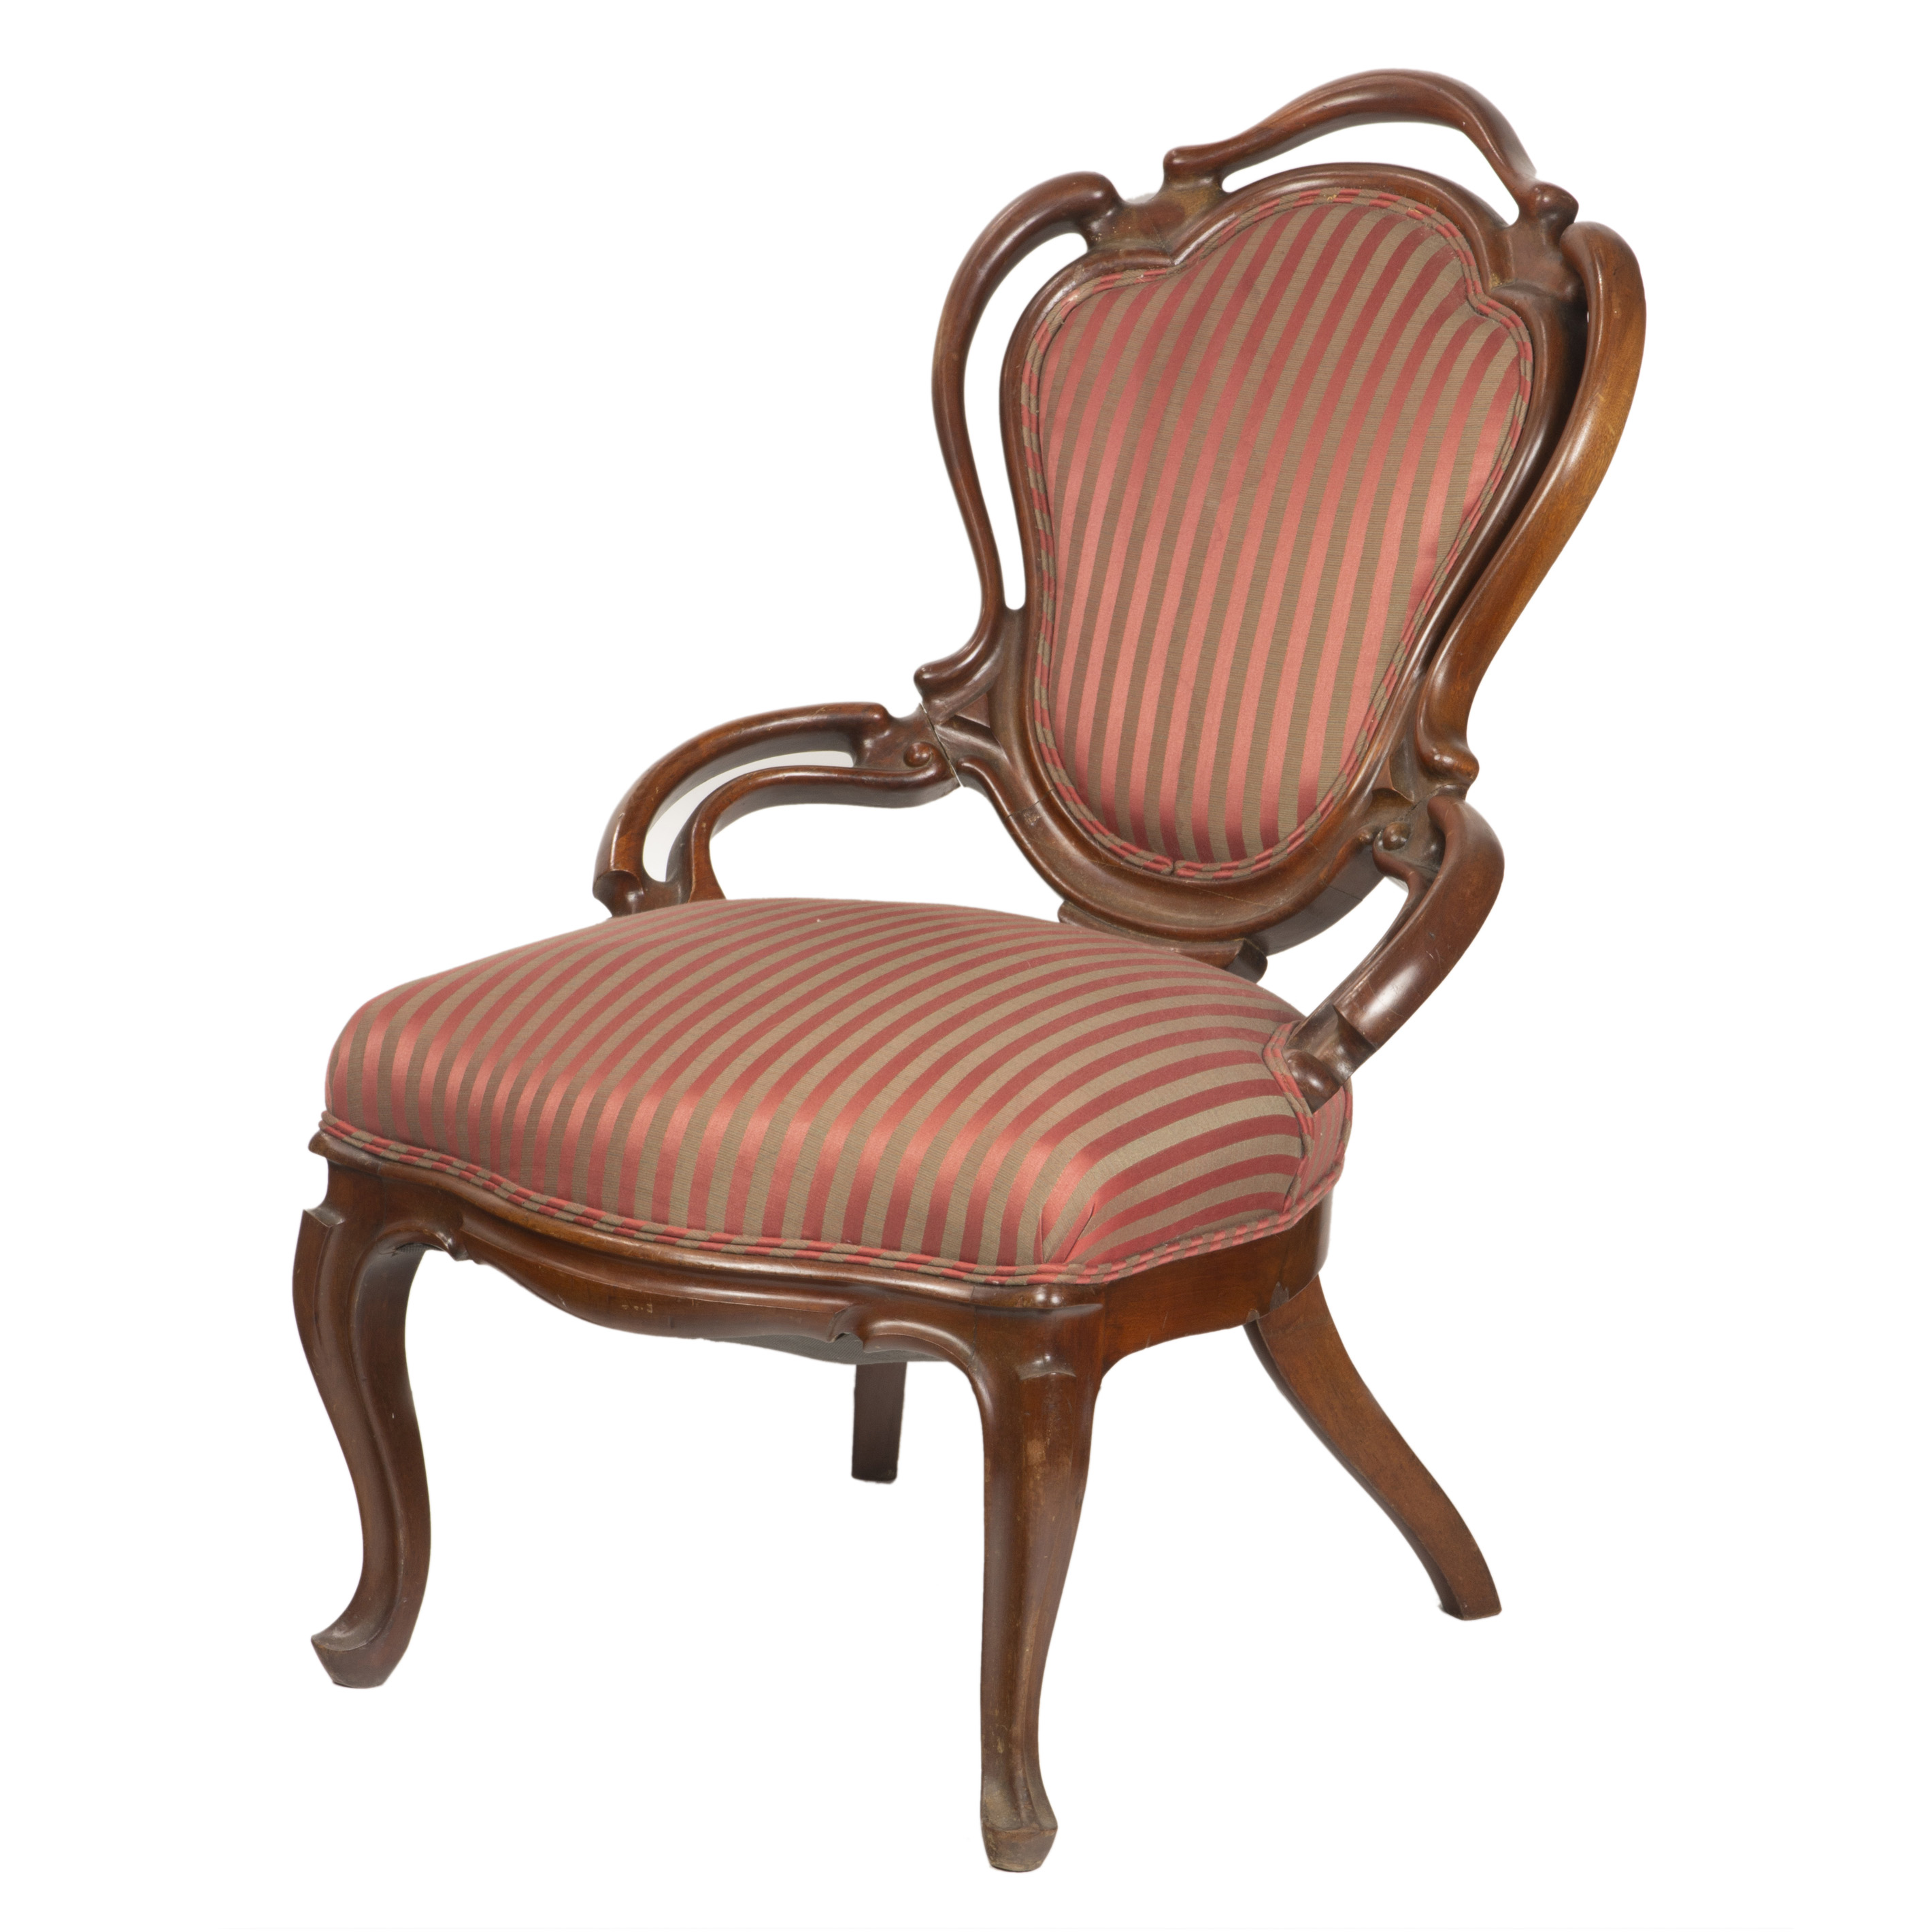 VICTORIAN ROCOCO REVIVAL SIDE CHAIR 3a4261